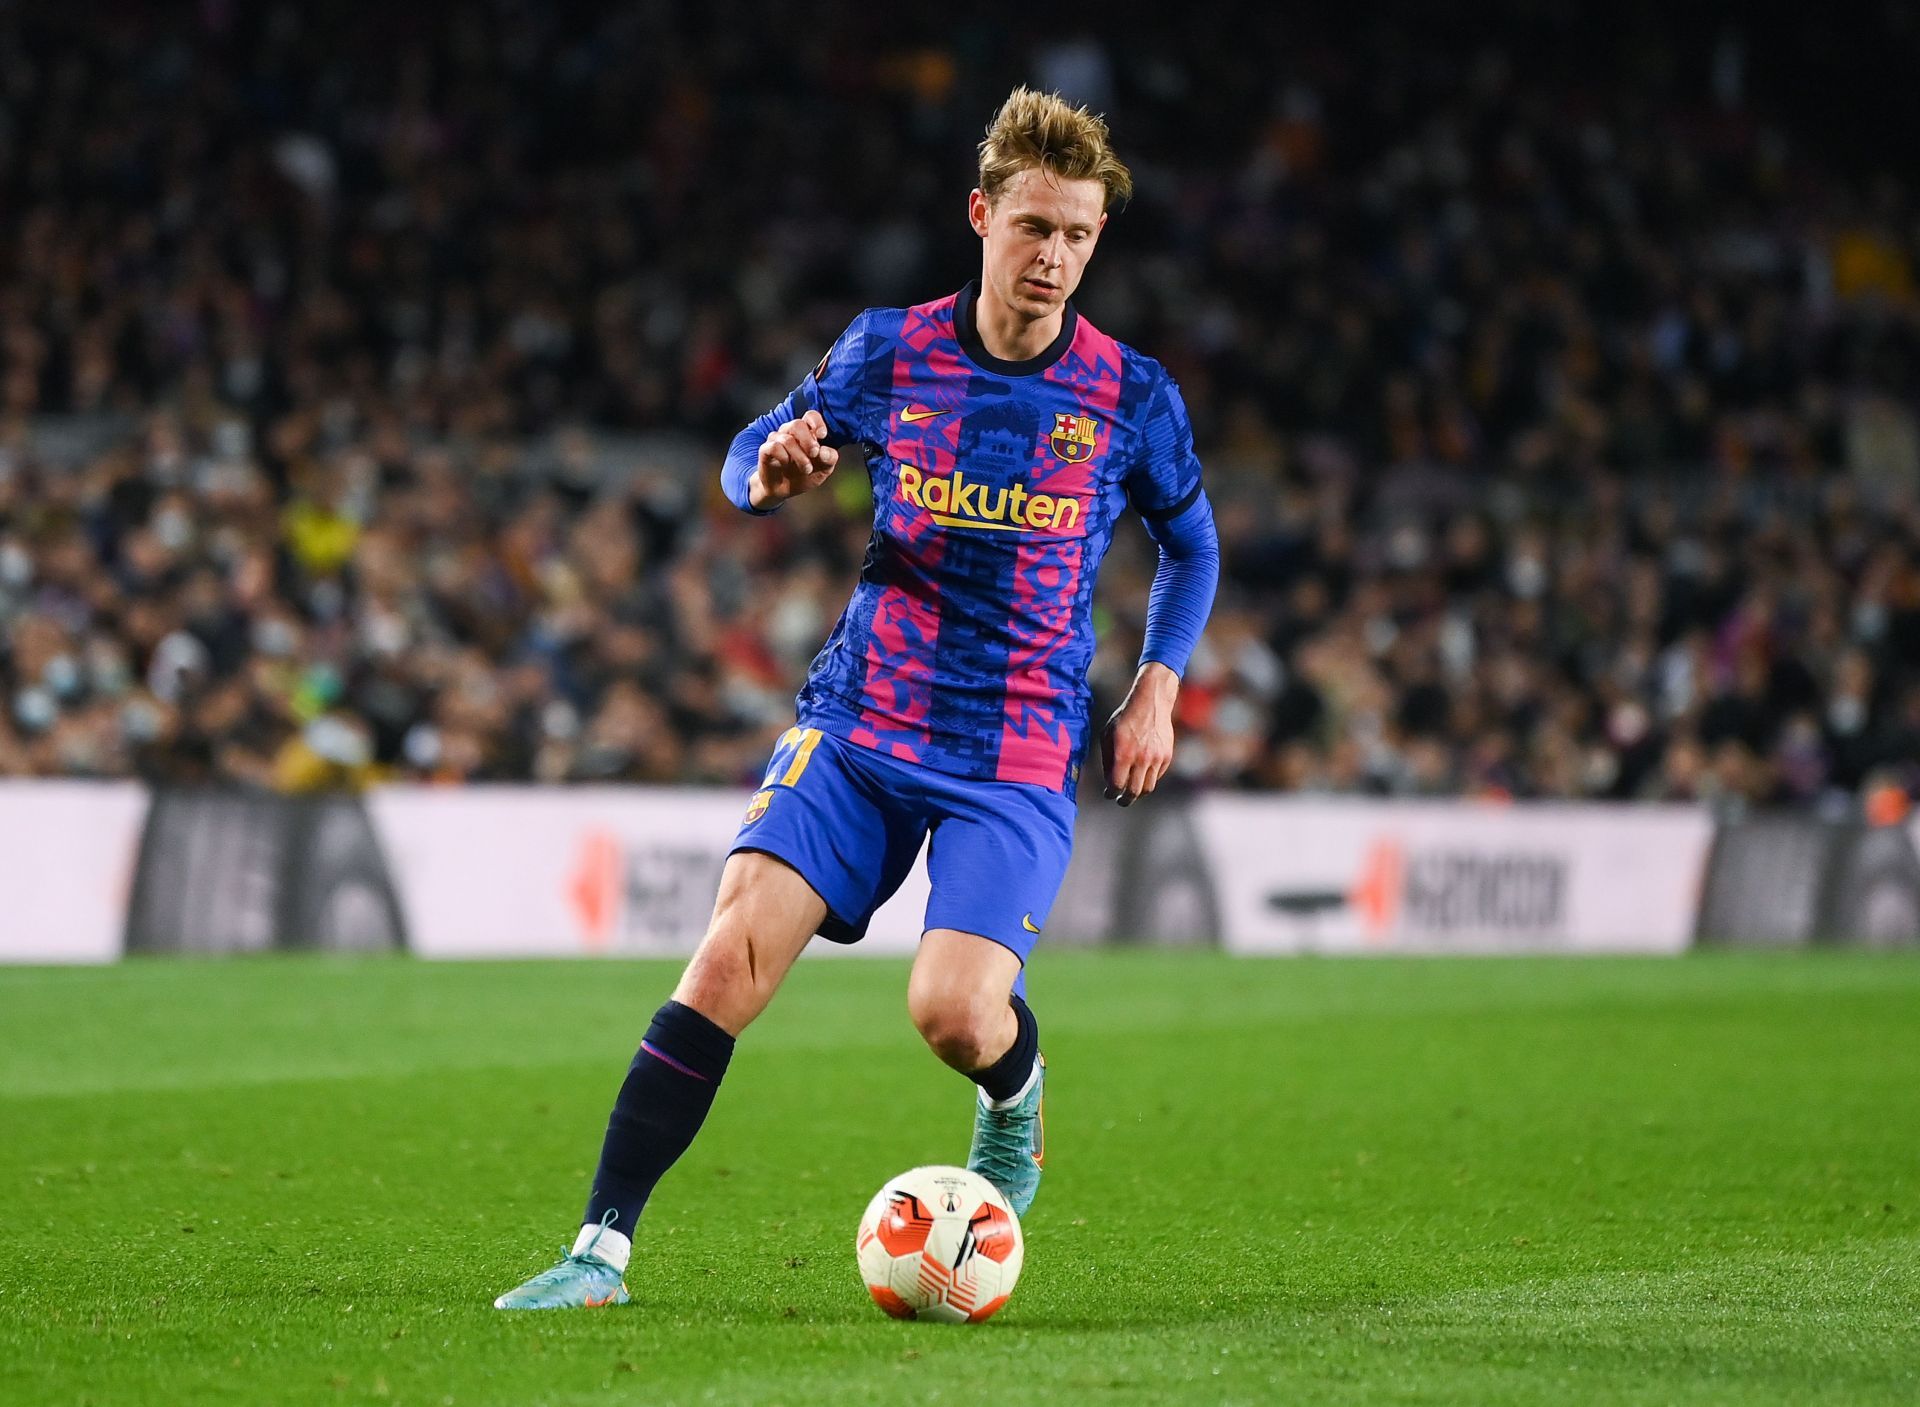 The Barca midfielder may be on the move.